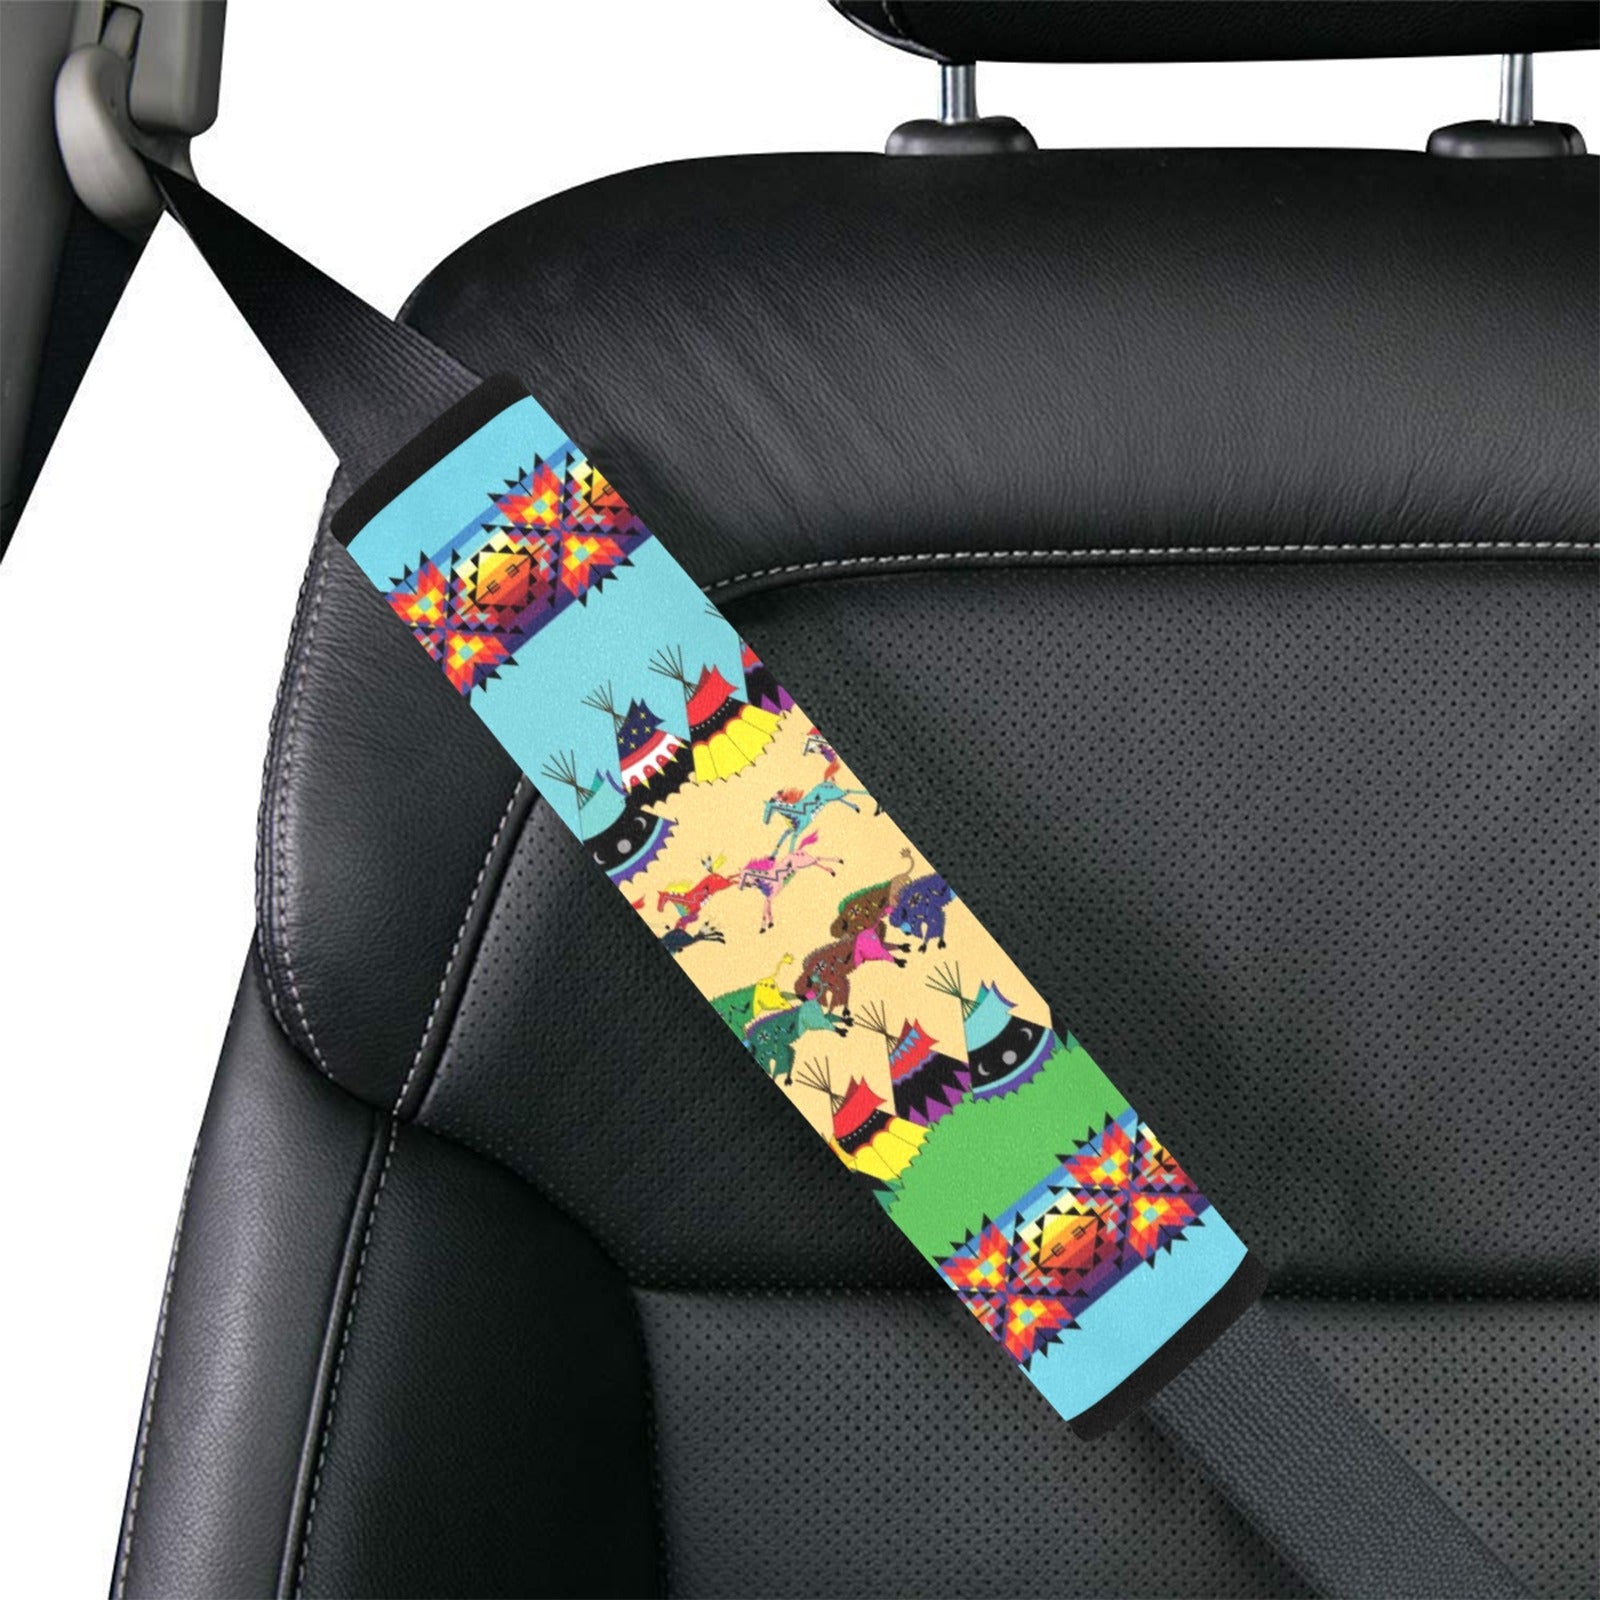 Horses and Buffalo Ledger Torquoise Car Seat Belt Cover 7''x12.6'' (Pack of 2)